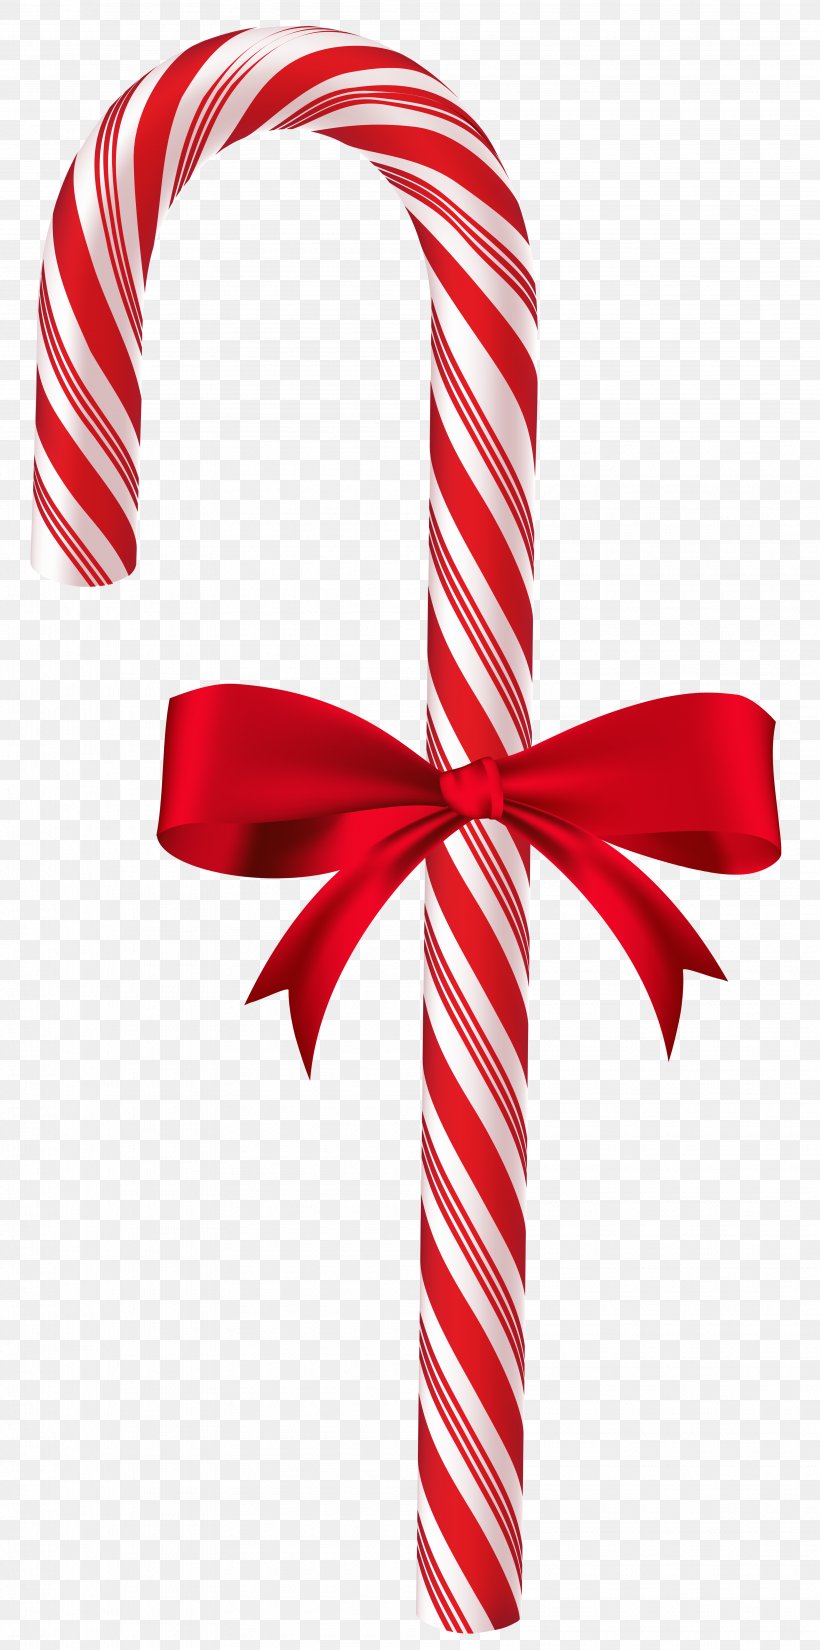 Candy Cane Lollipop Clip Art, PNG, 3775x7600px, Candy Cane, Candy, Cane